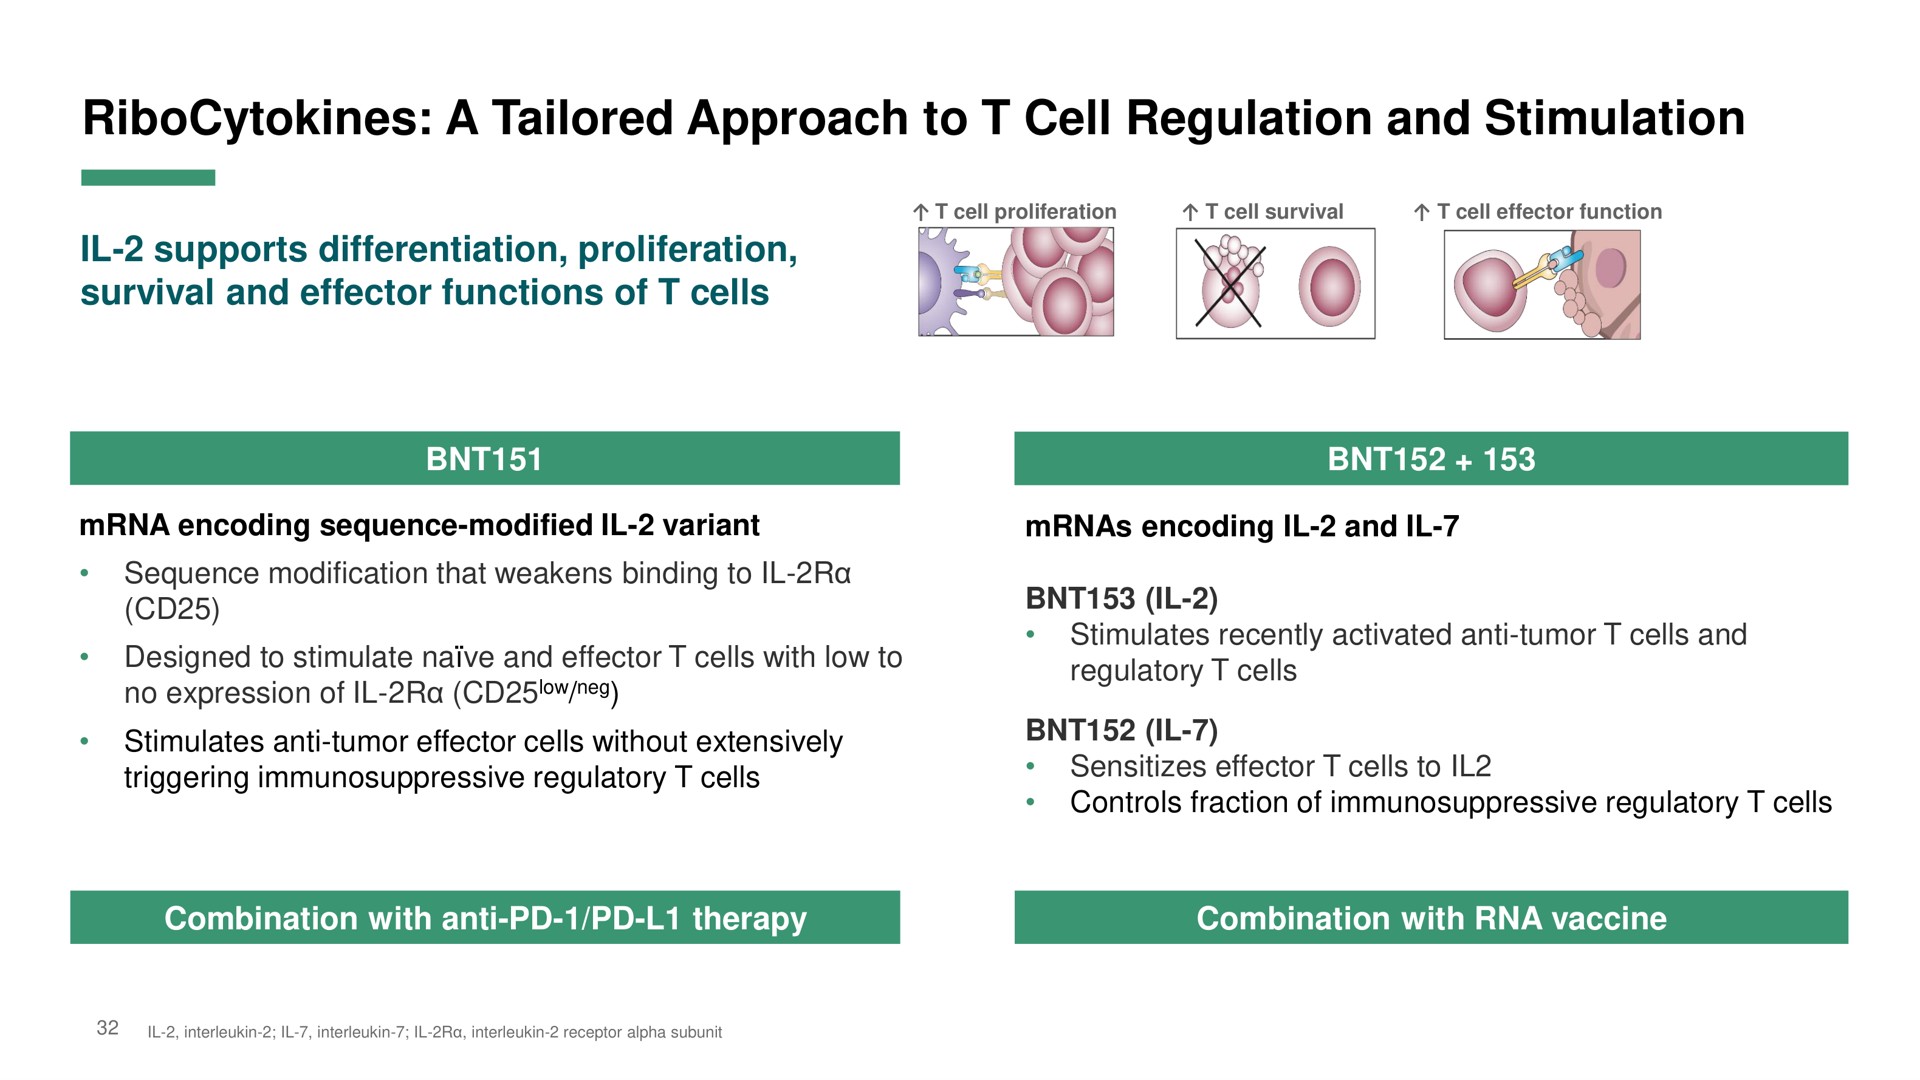 a tailored approach to cell regulation and stimulation | BioNTech